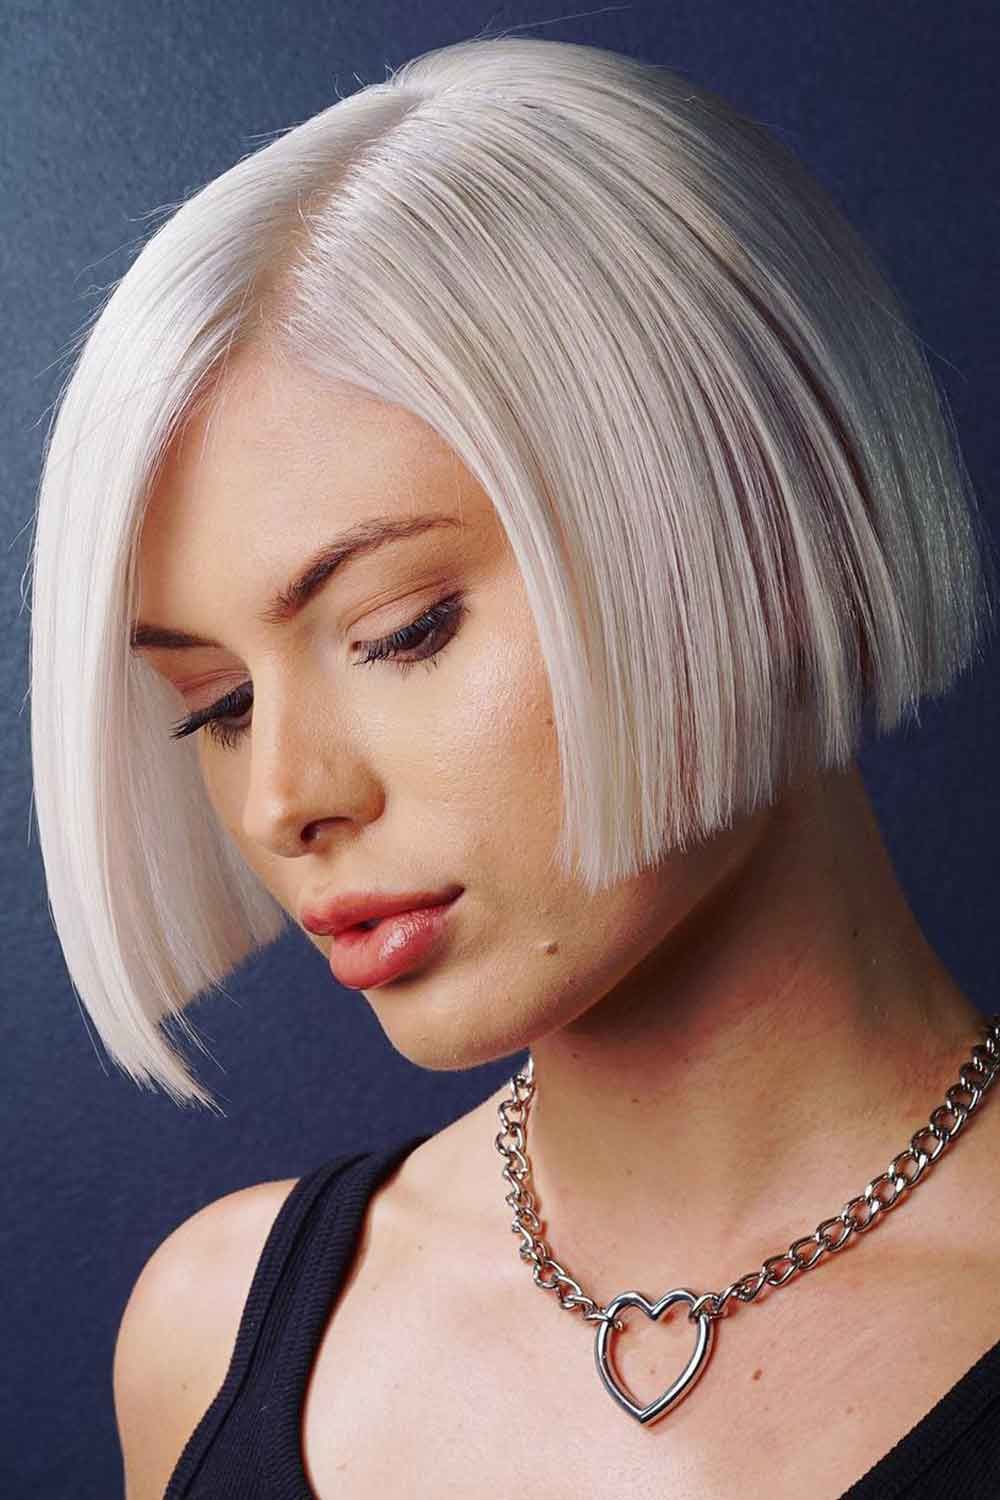 hairstyles for women over 50 new style straight bob